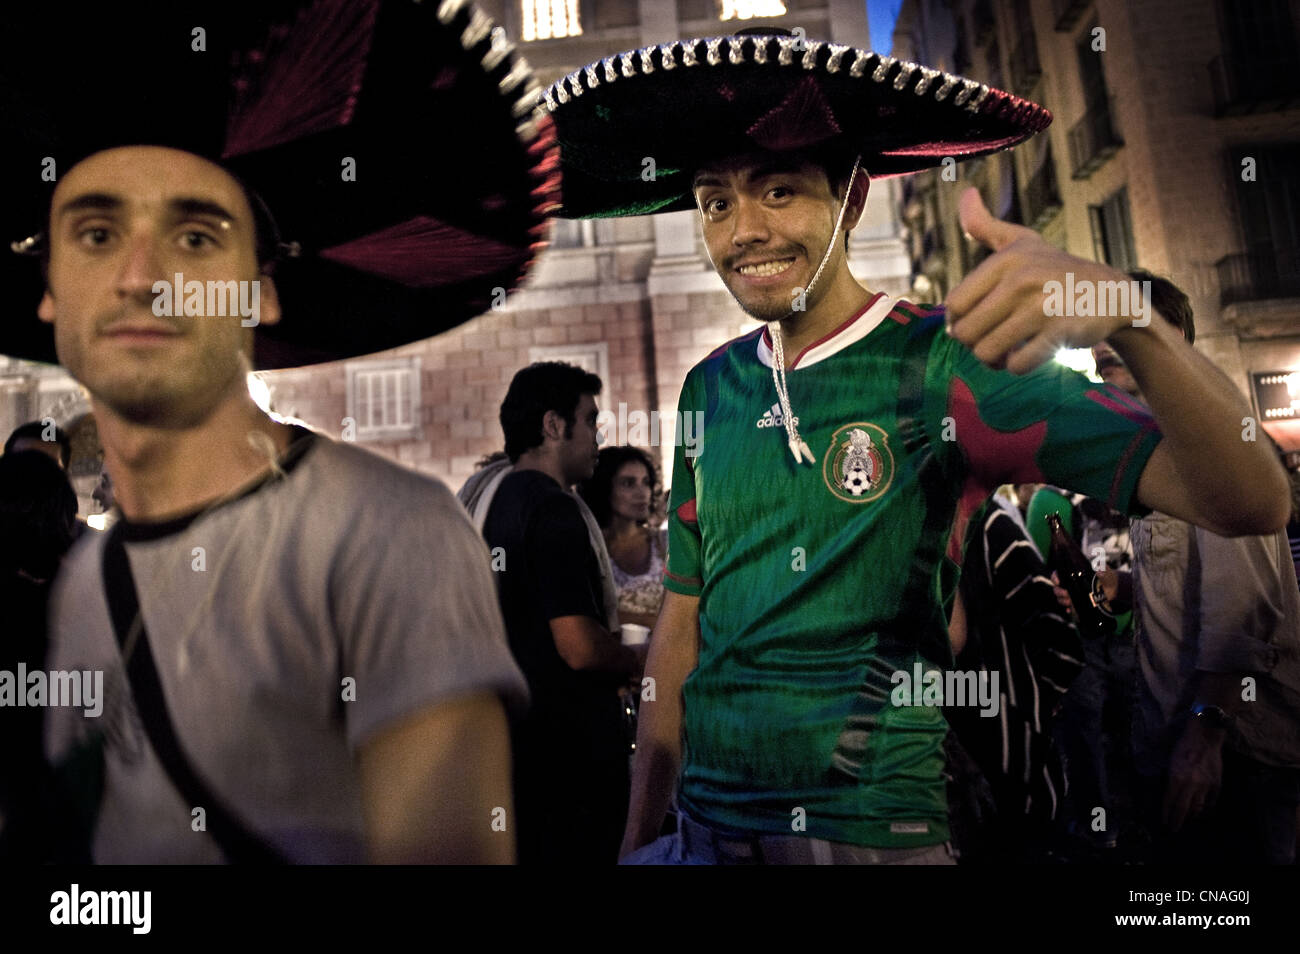 Mexican people, with the typical Mexican hat sombrero, celebrating the bicentennial of Mexican independence in Barcelona, Spain. Stock Photo